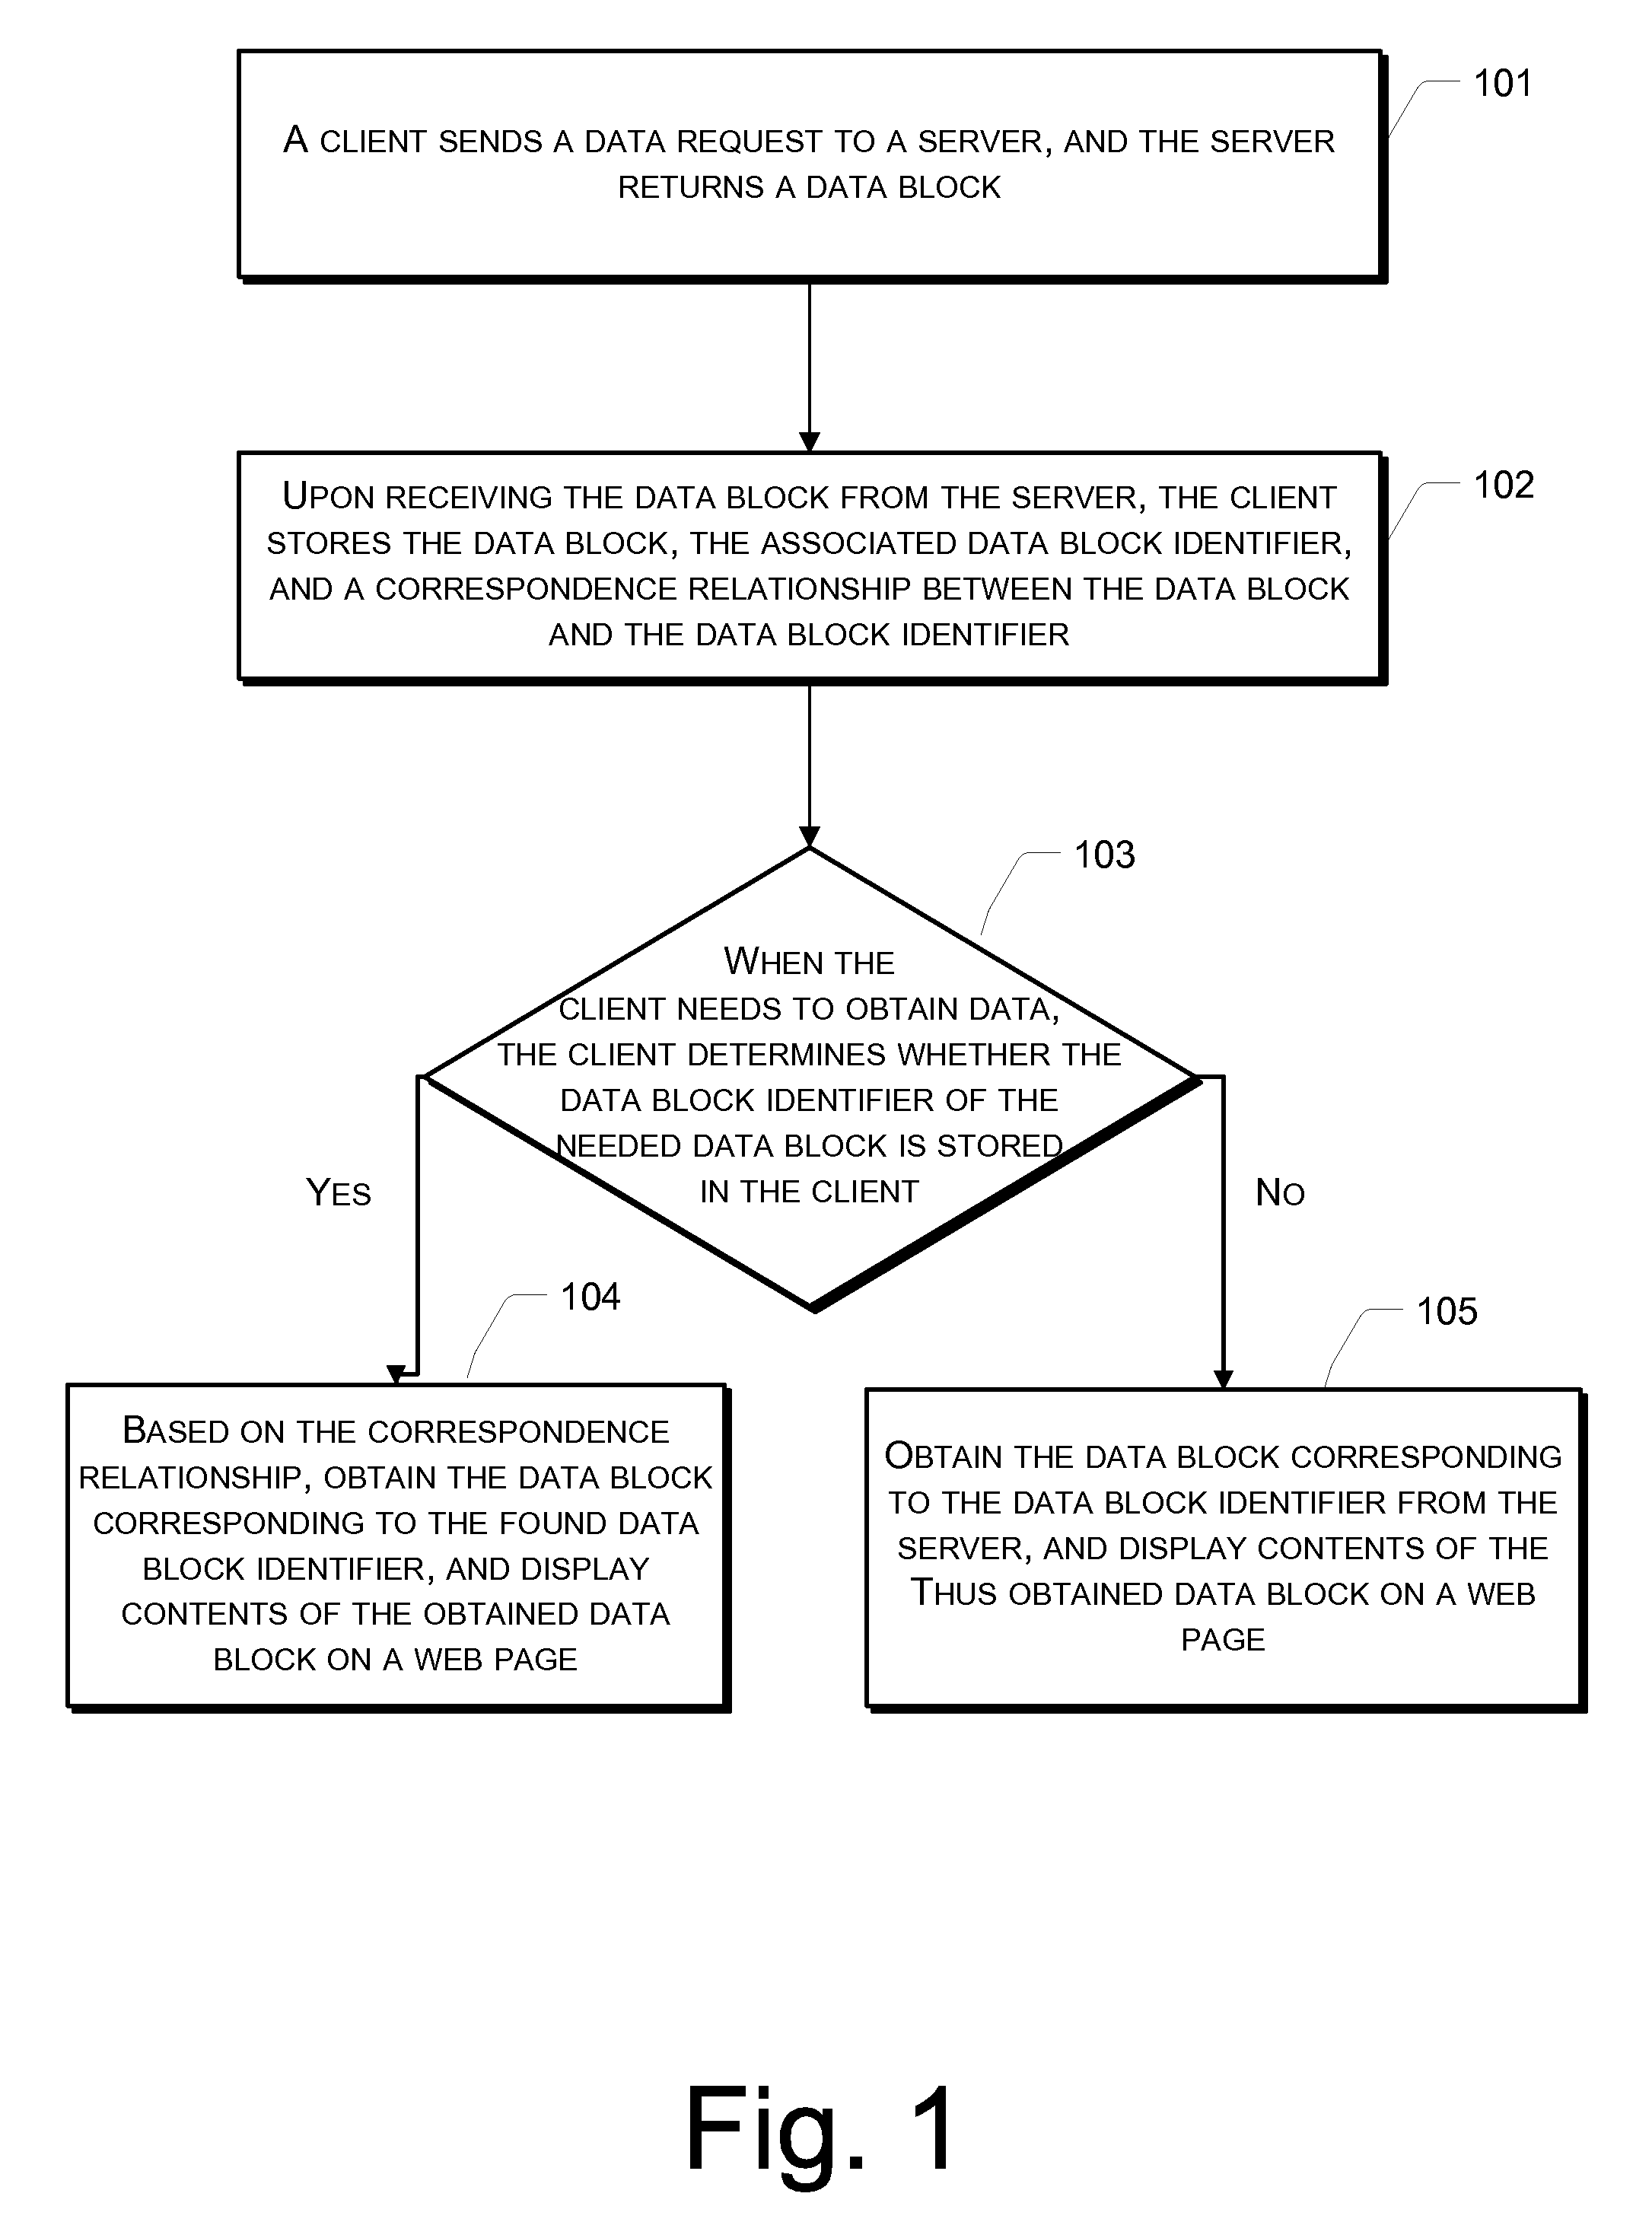 Method and System for Displaying Web Page